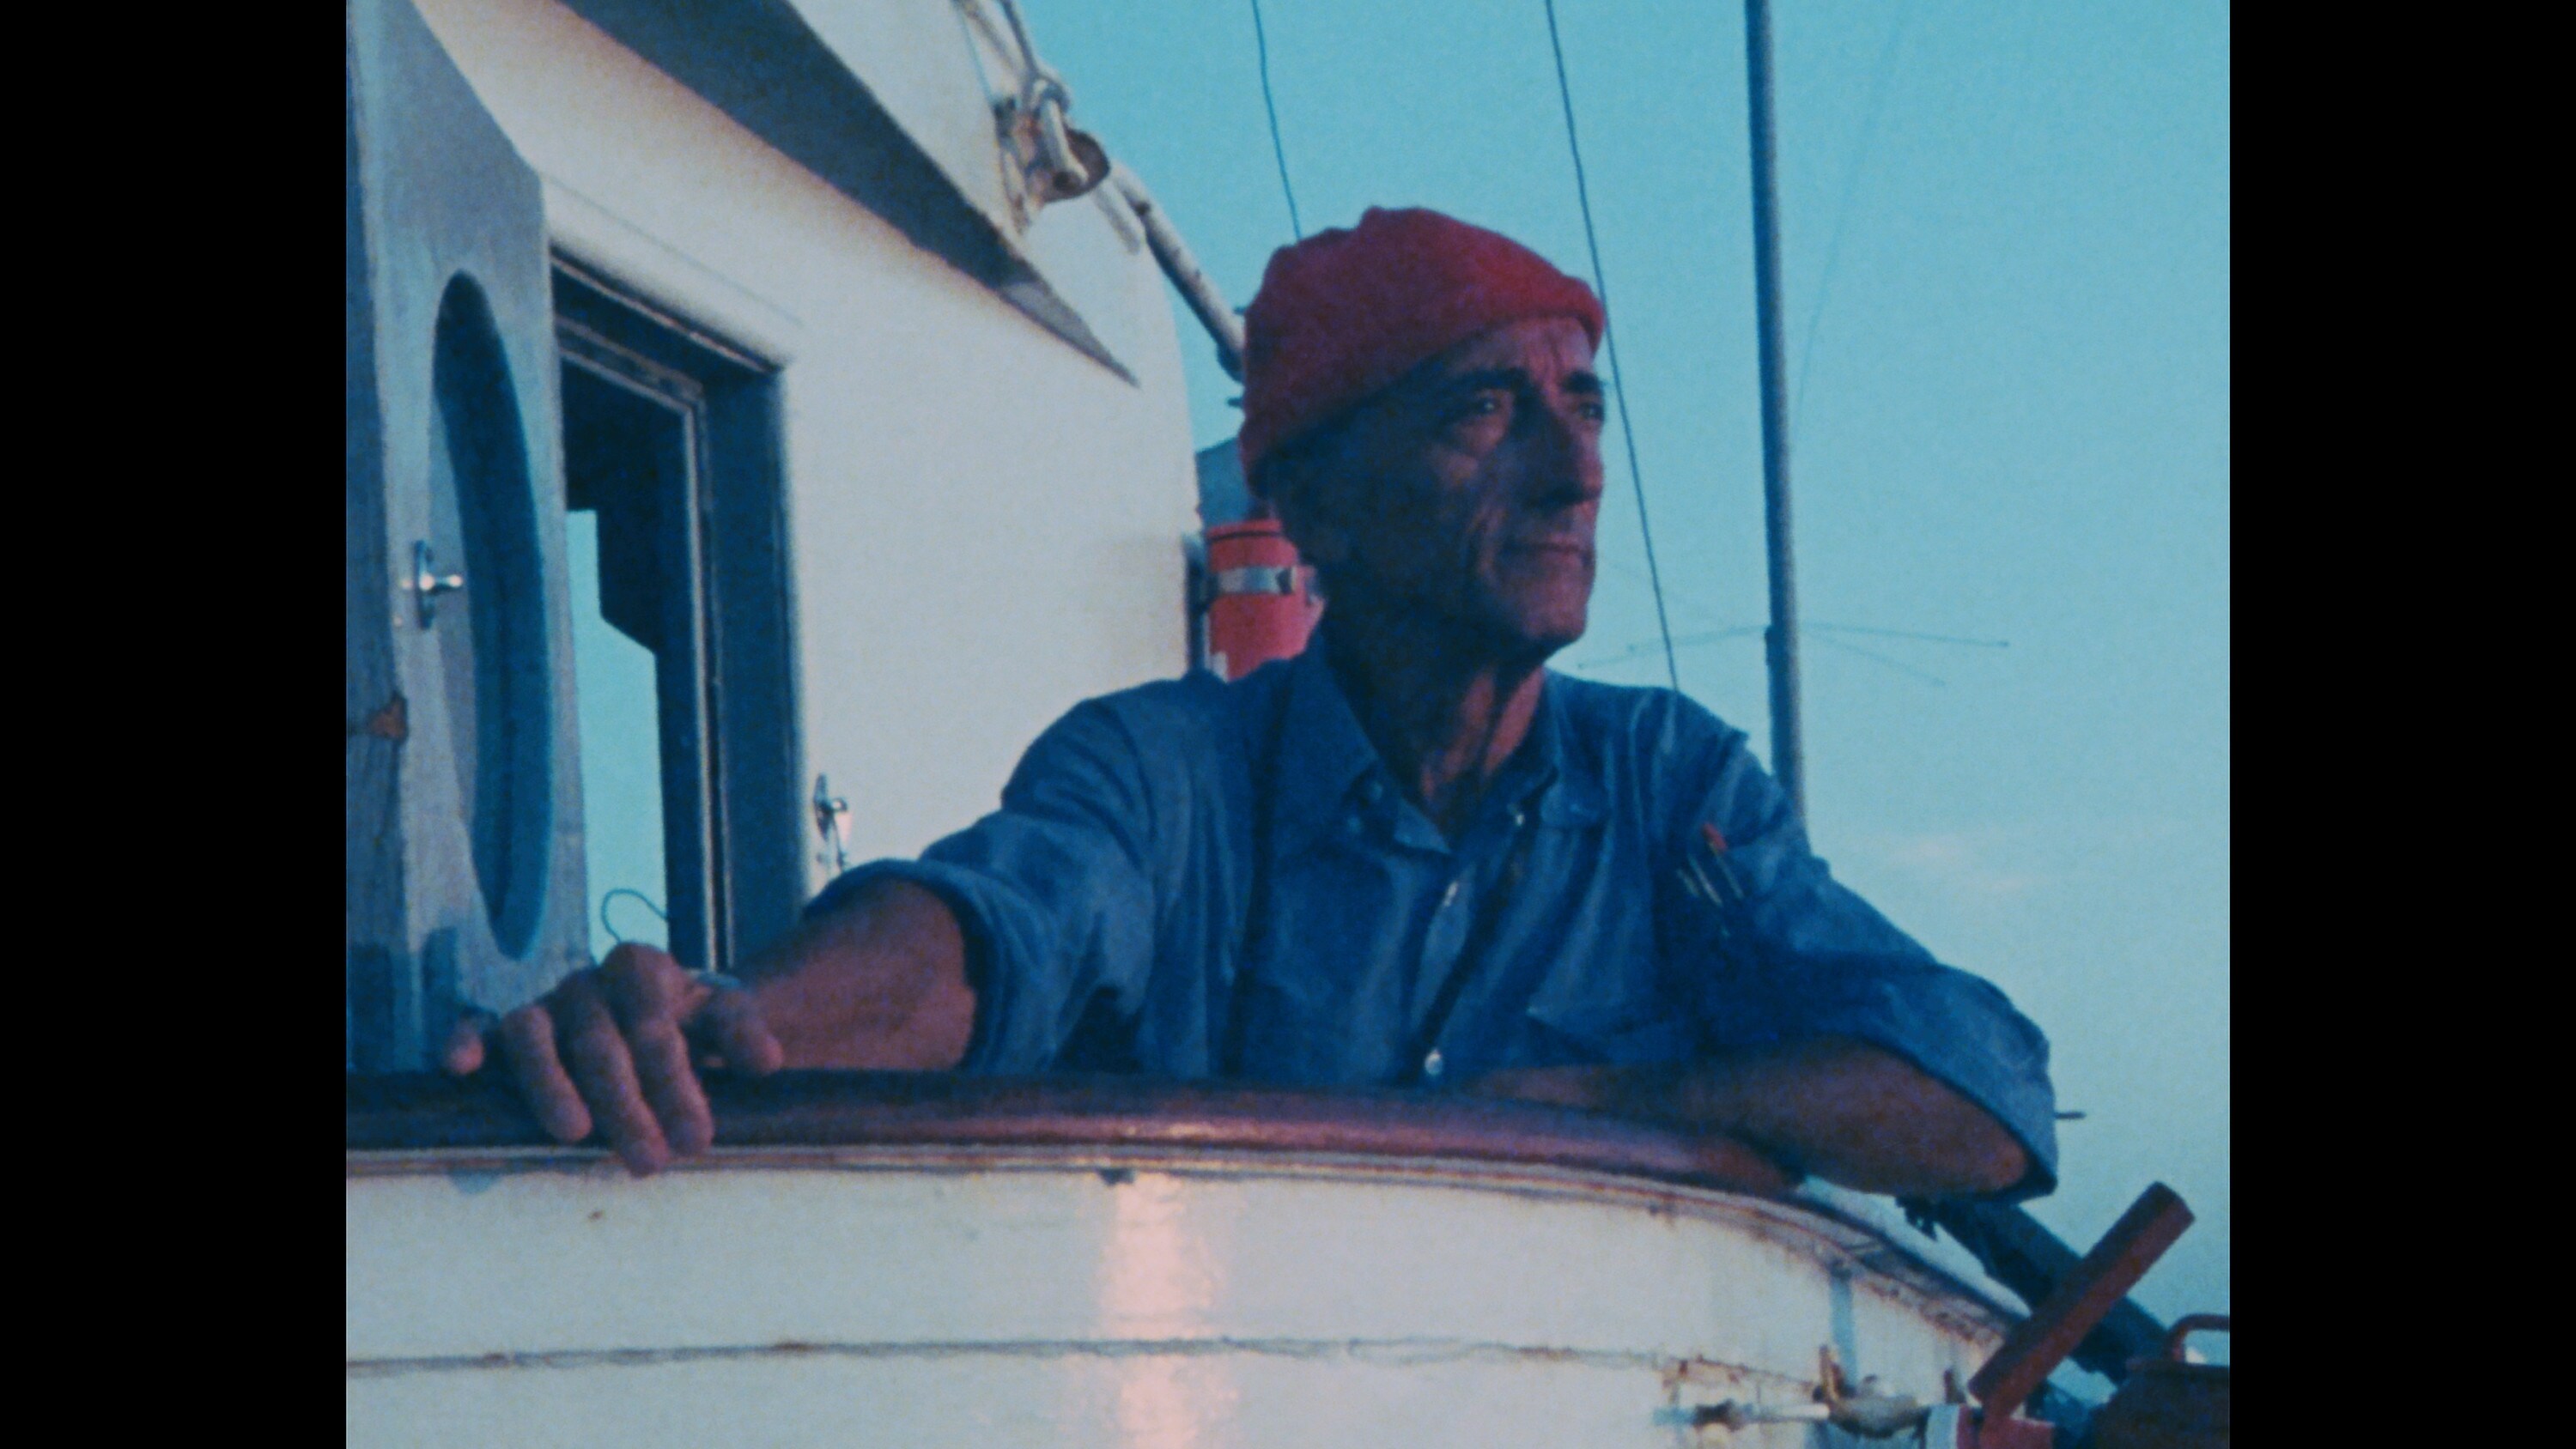 Jacques Cousteau aboard his ship, Calypso. (Credit: The Cousteau Society)